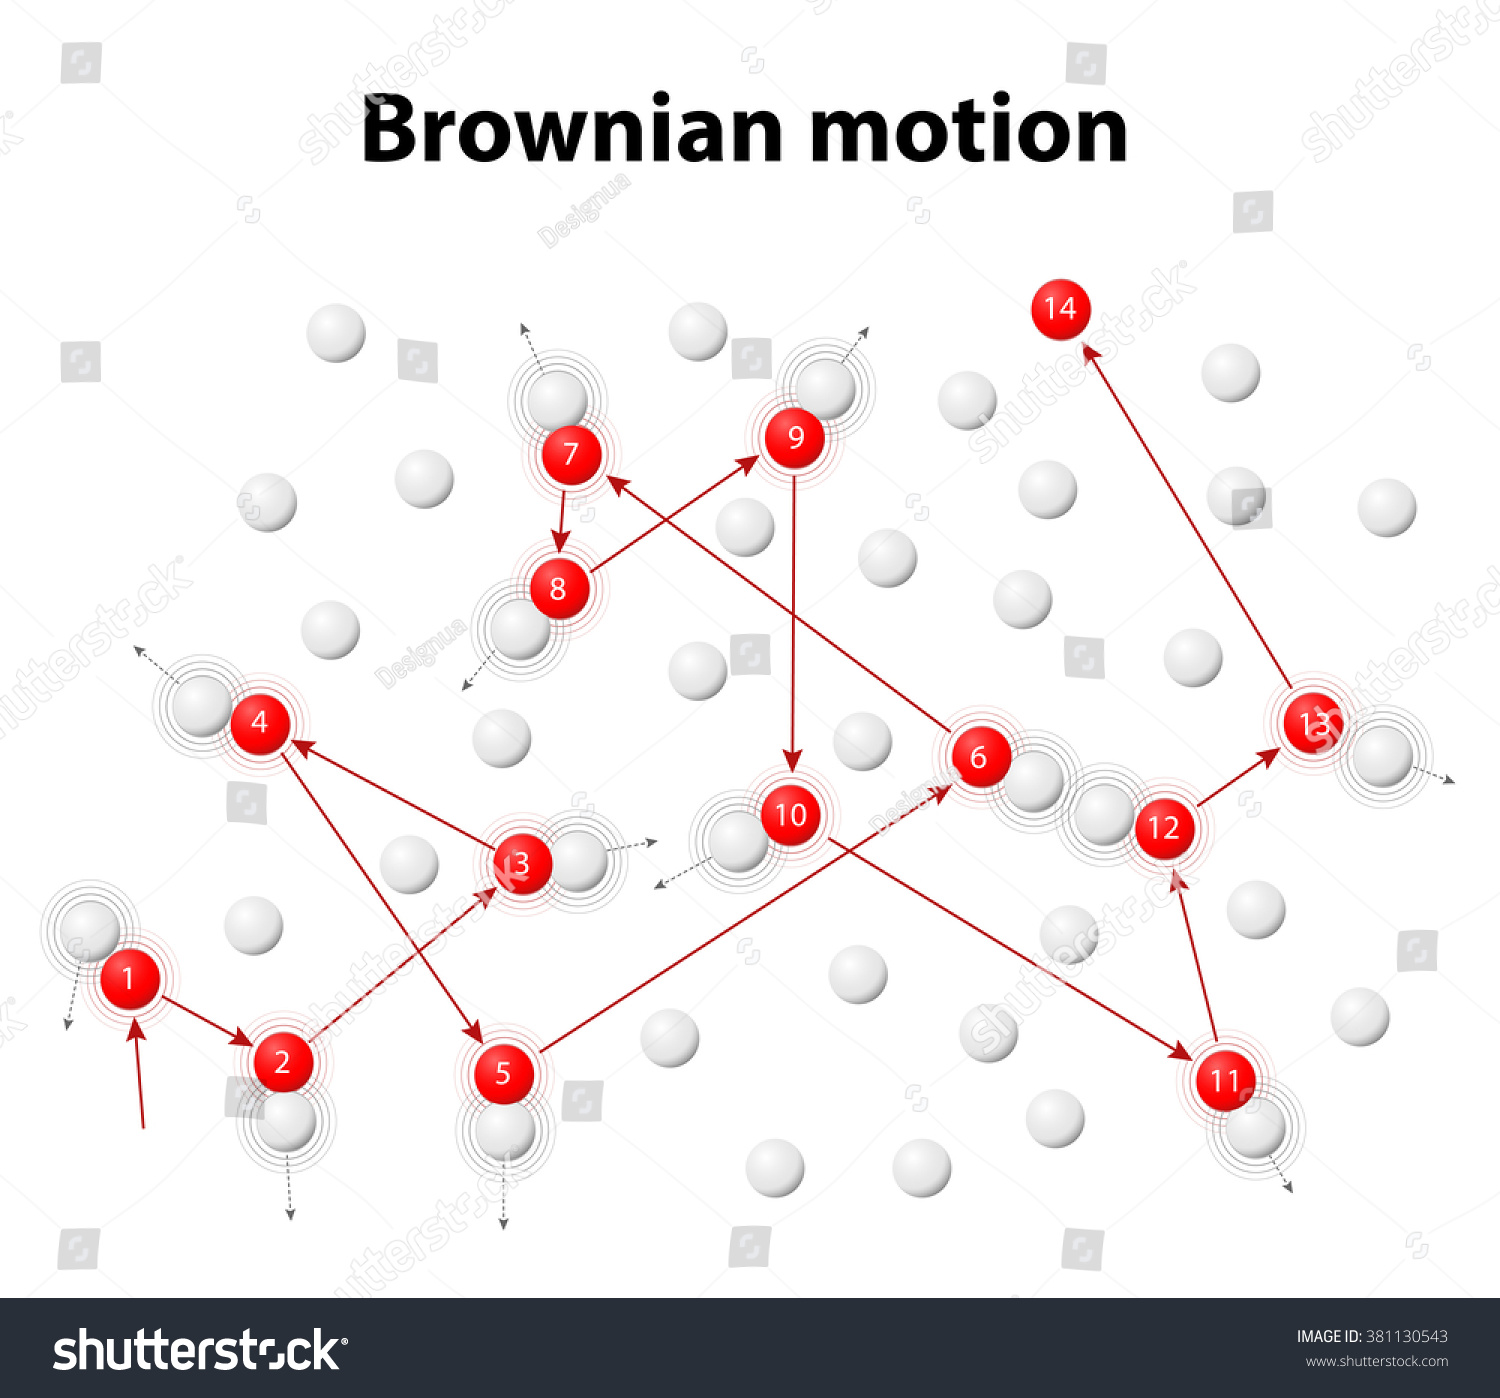 simulation-brownian-motion-particle-that-collides